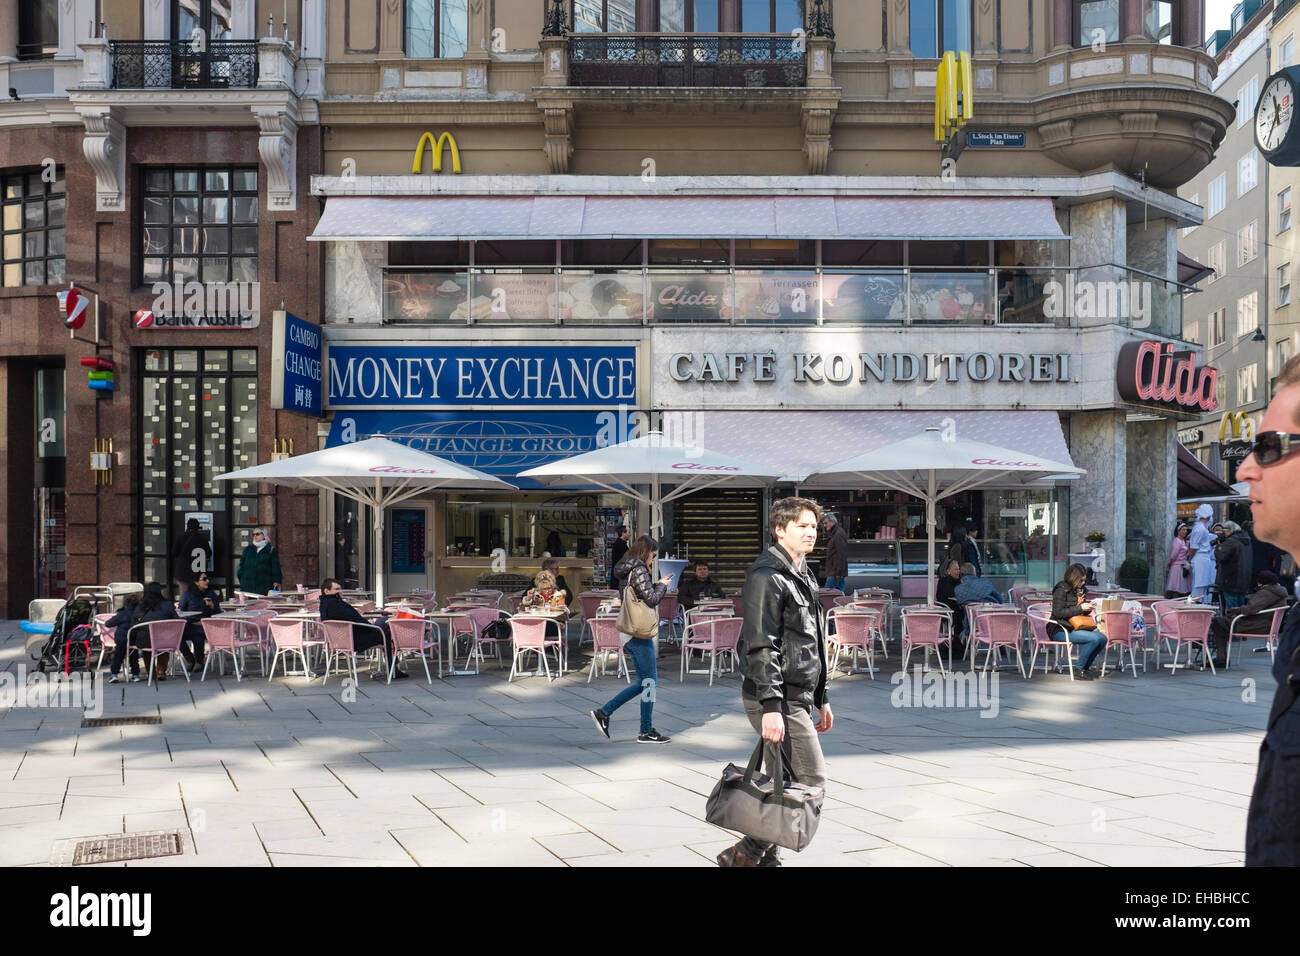 Cafe Konditorei High Resolution Stock Photography and Images - Alamy